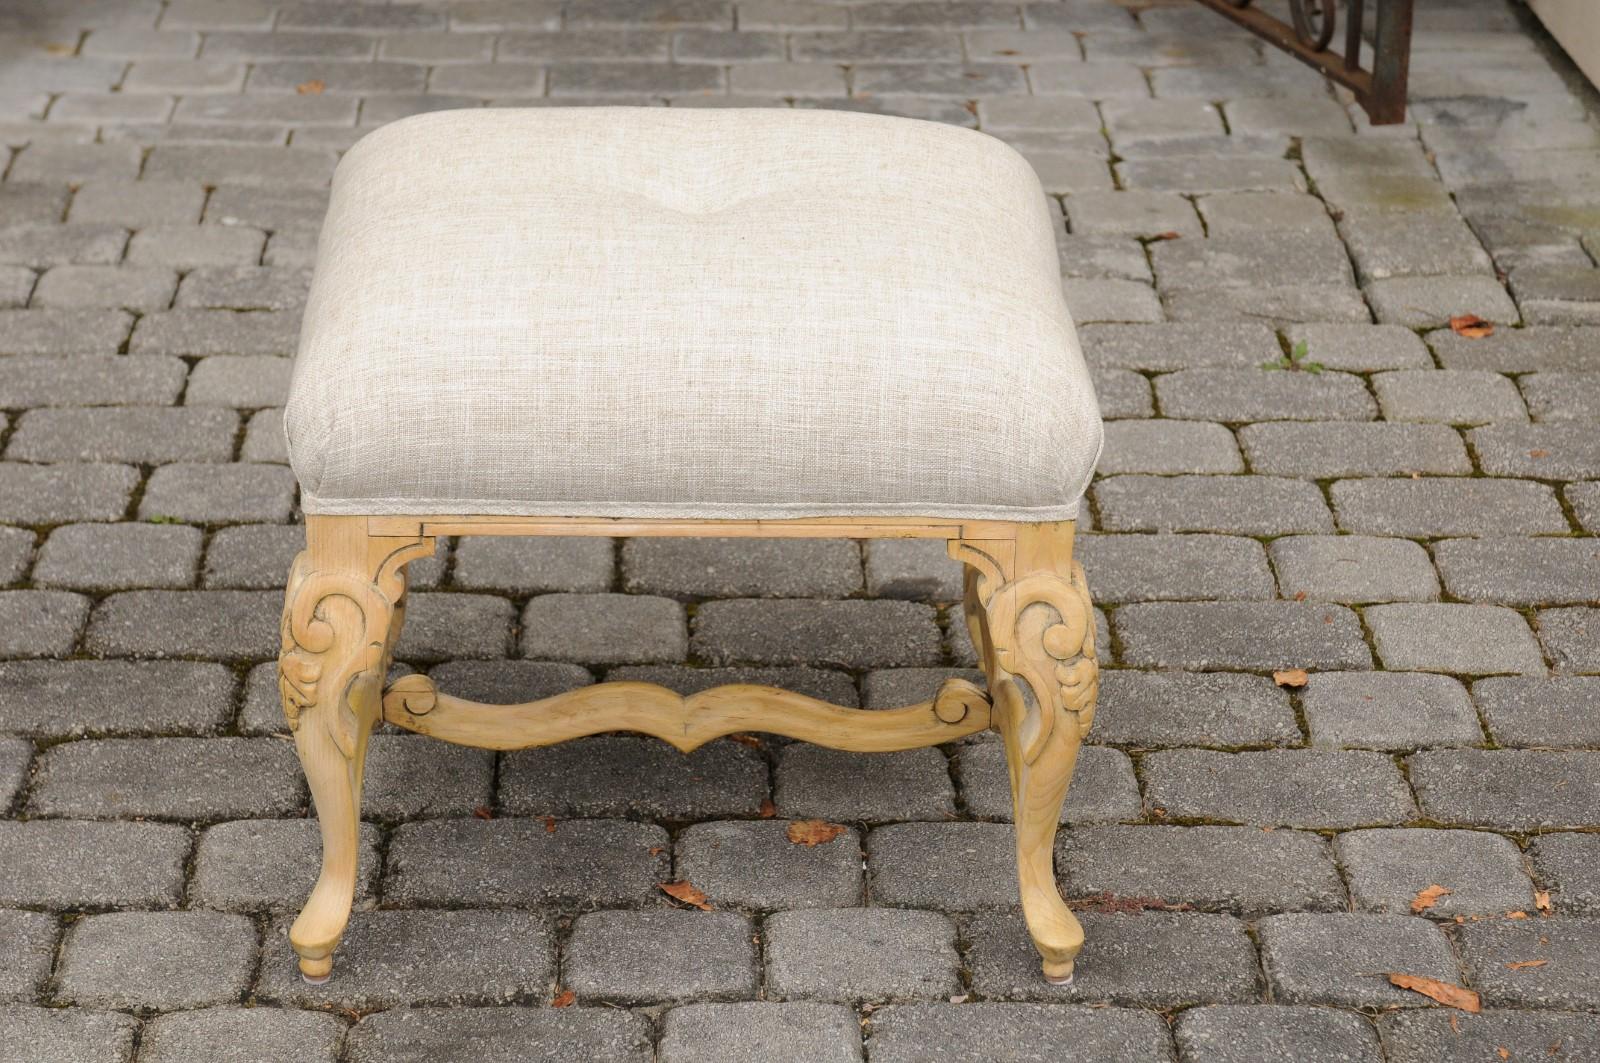 1950s Vintage Italian Rococo Style Ottoman with Cabriole Legs and New Upholstery (Polster)